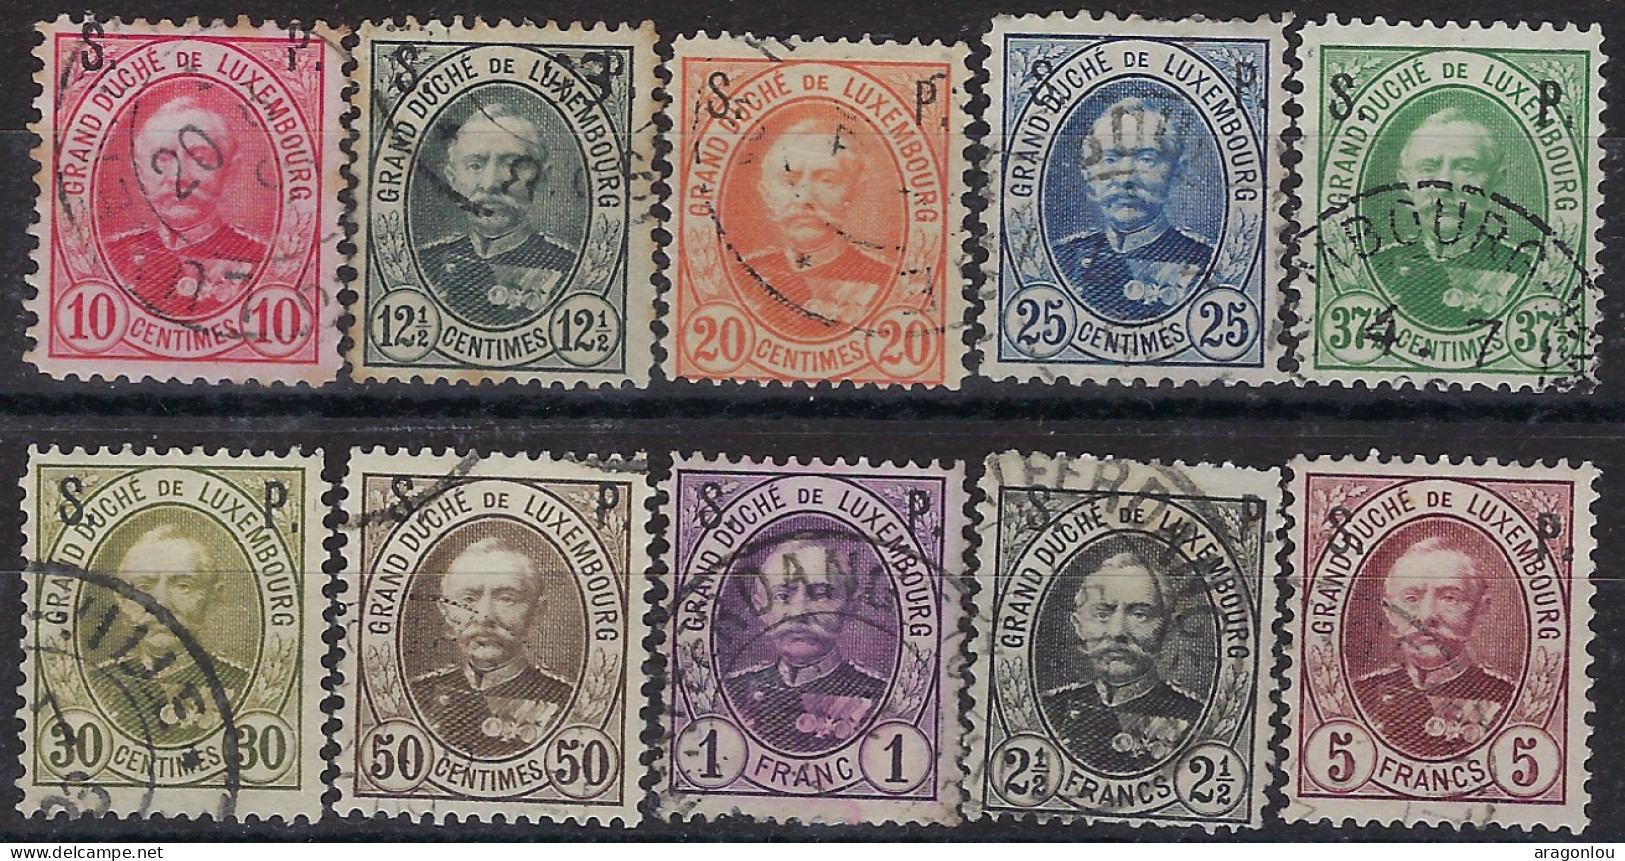 Luxembourg - Luxemburg - Timbre   1891   Adolphe   °    Série  S.P.   VC. 225,- - 1891 Adolphe Voorzijde